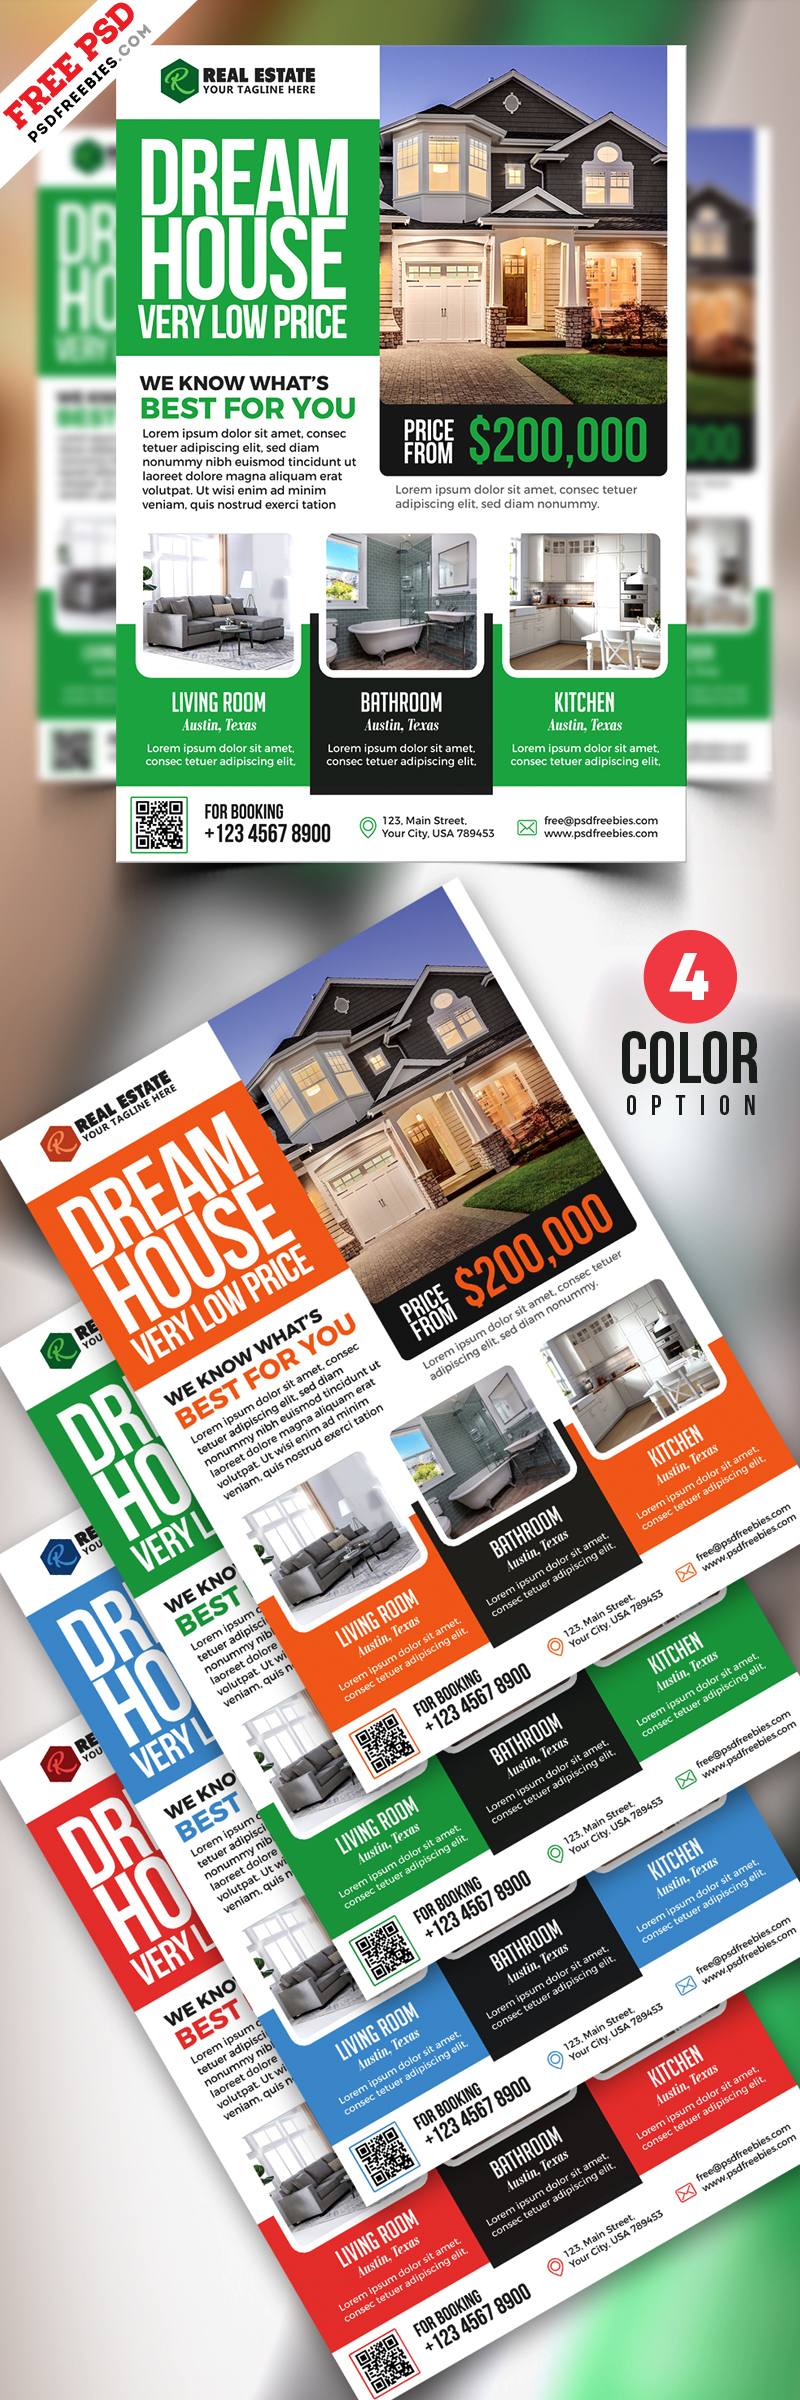 Real Estate Flyer Templates Psd Free Download